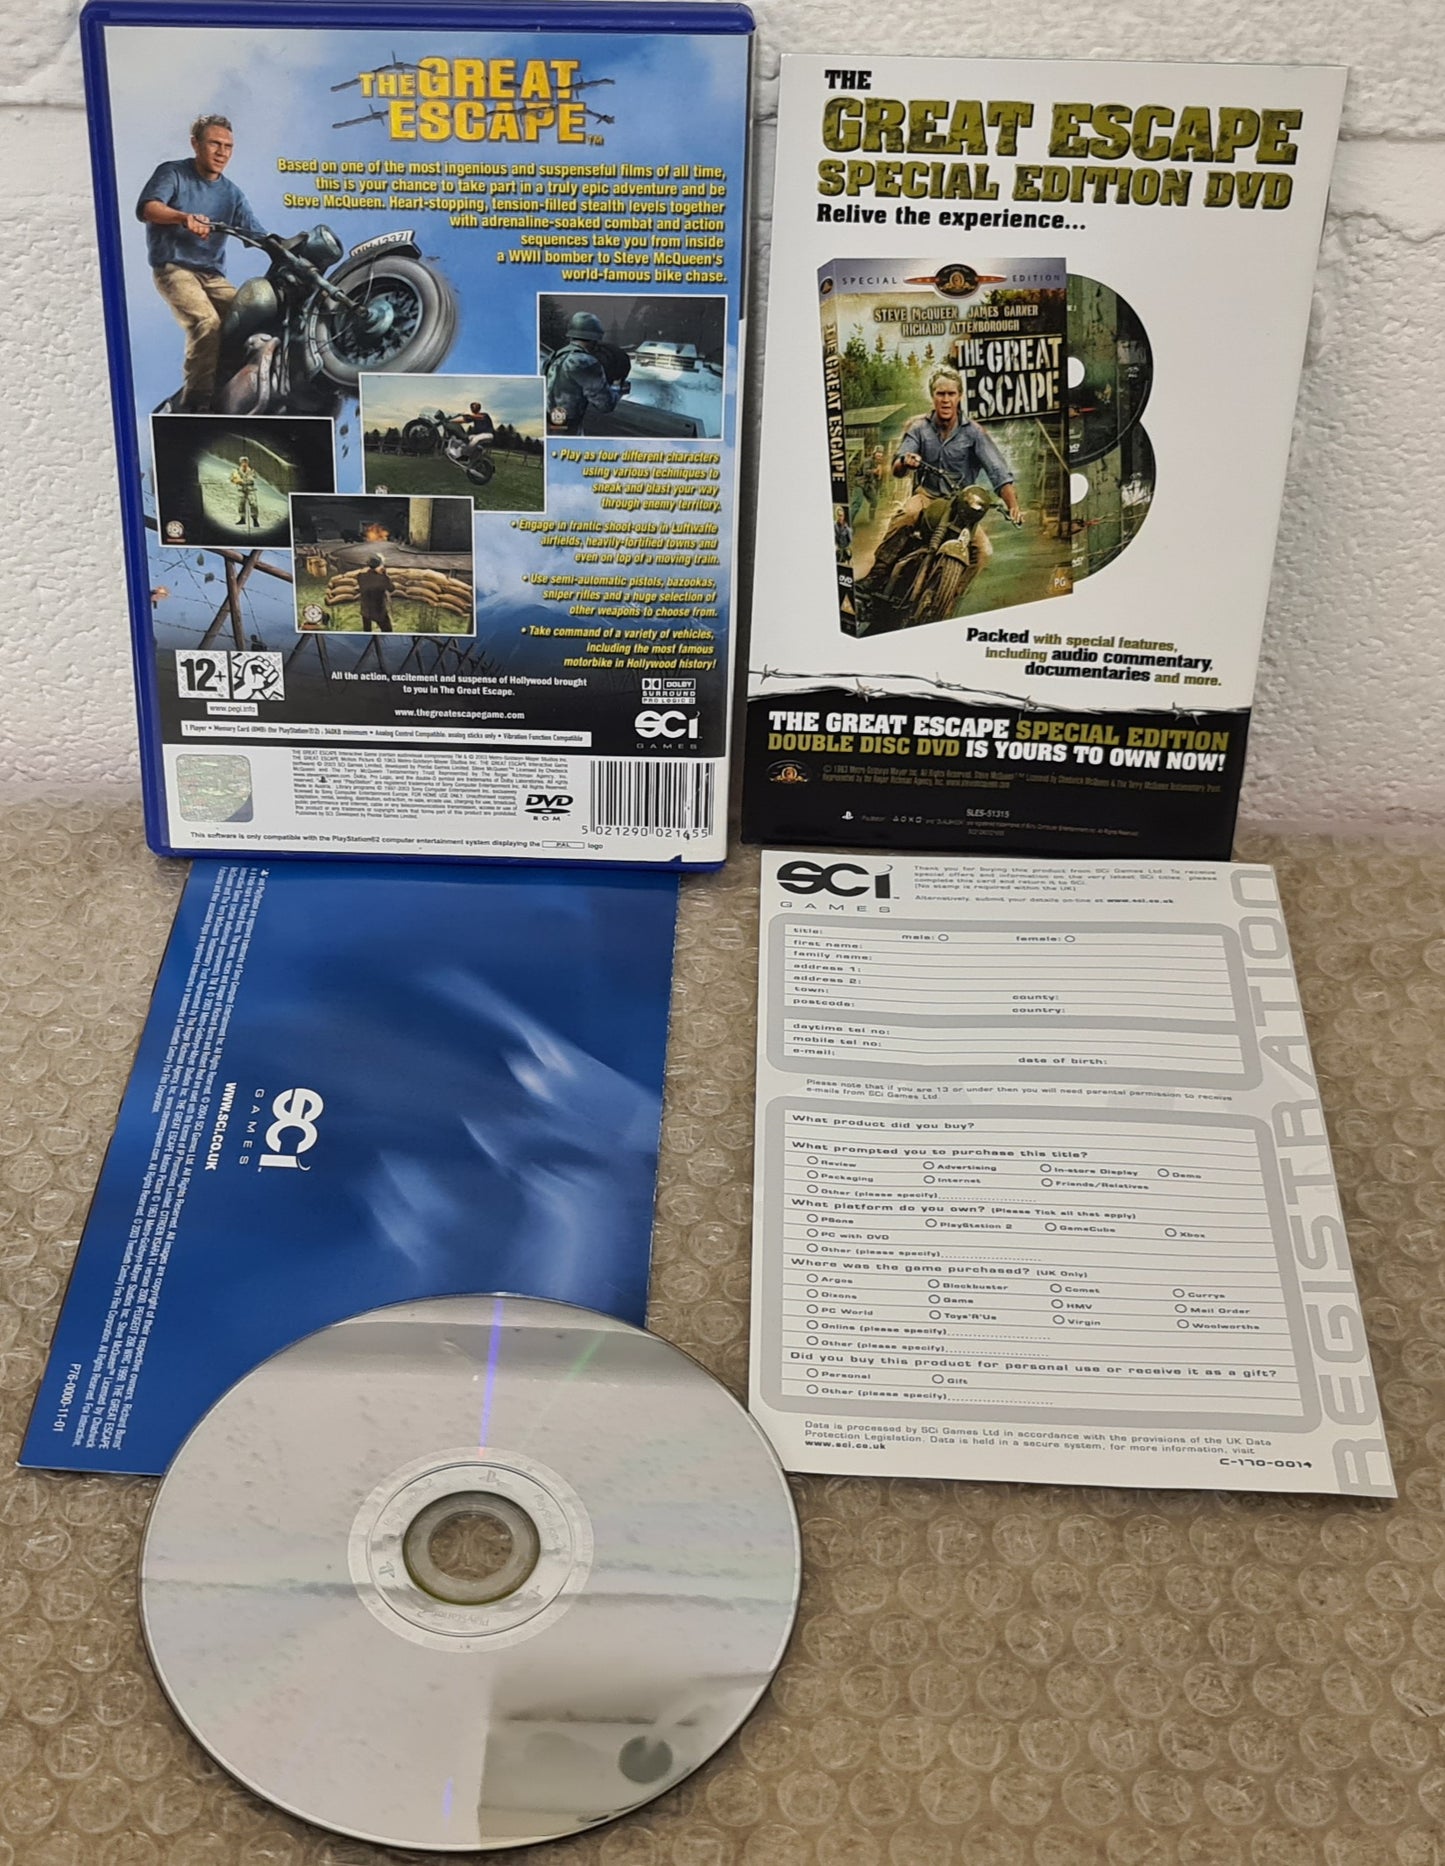 The Great Escape Sony Playstation 2 (PS2) Game